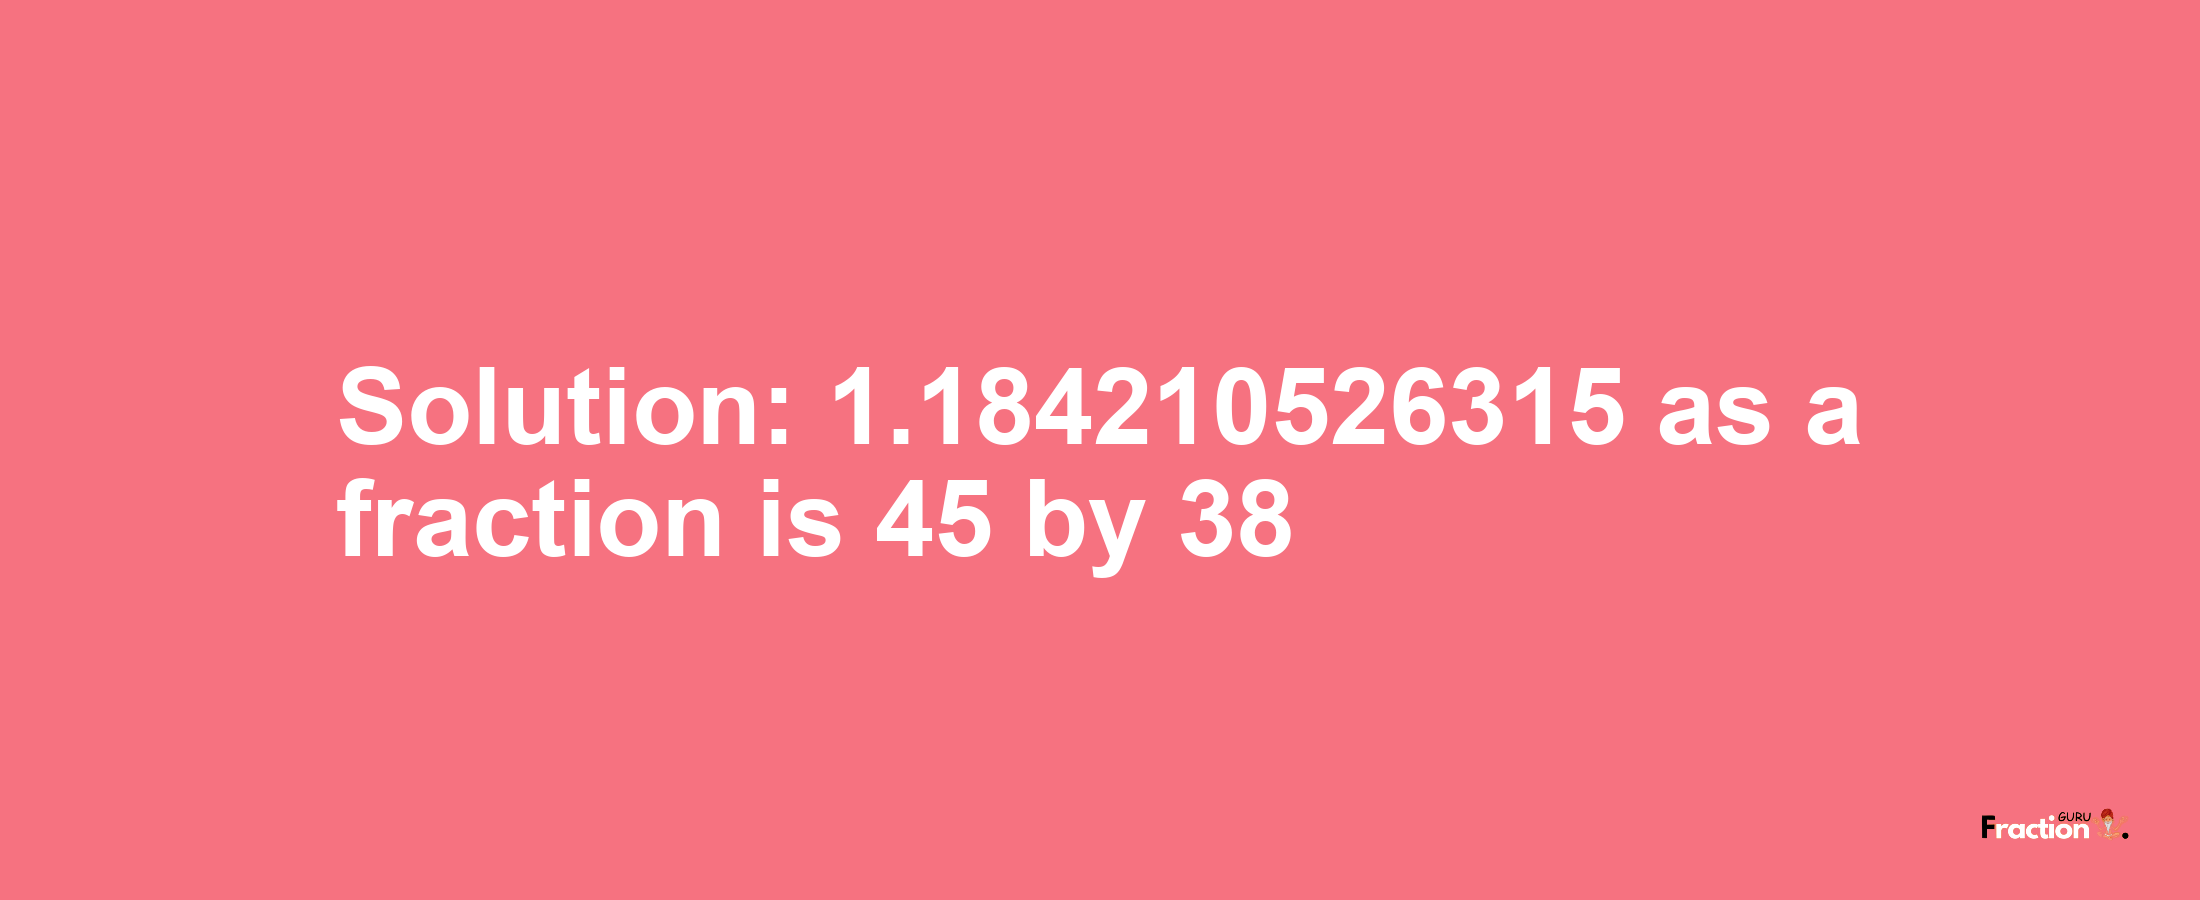 Solution:1.184210526315 as a fraction is 45/38